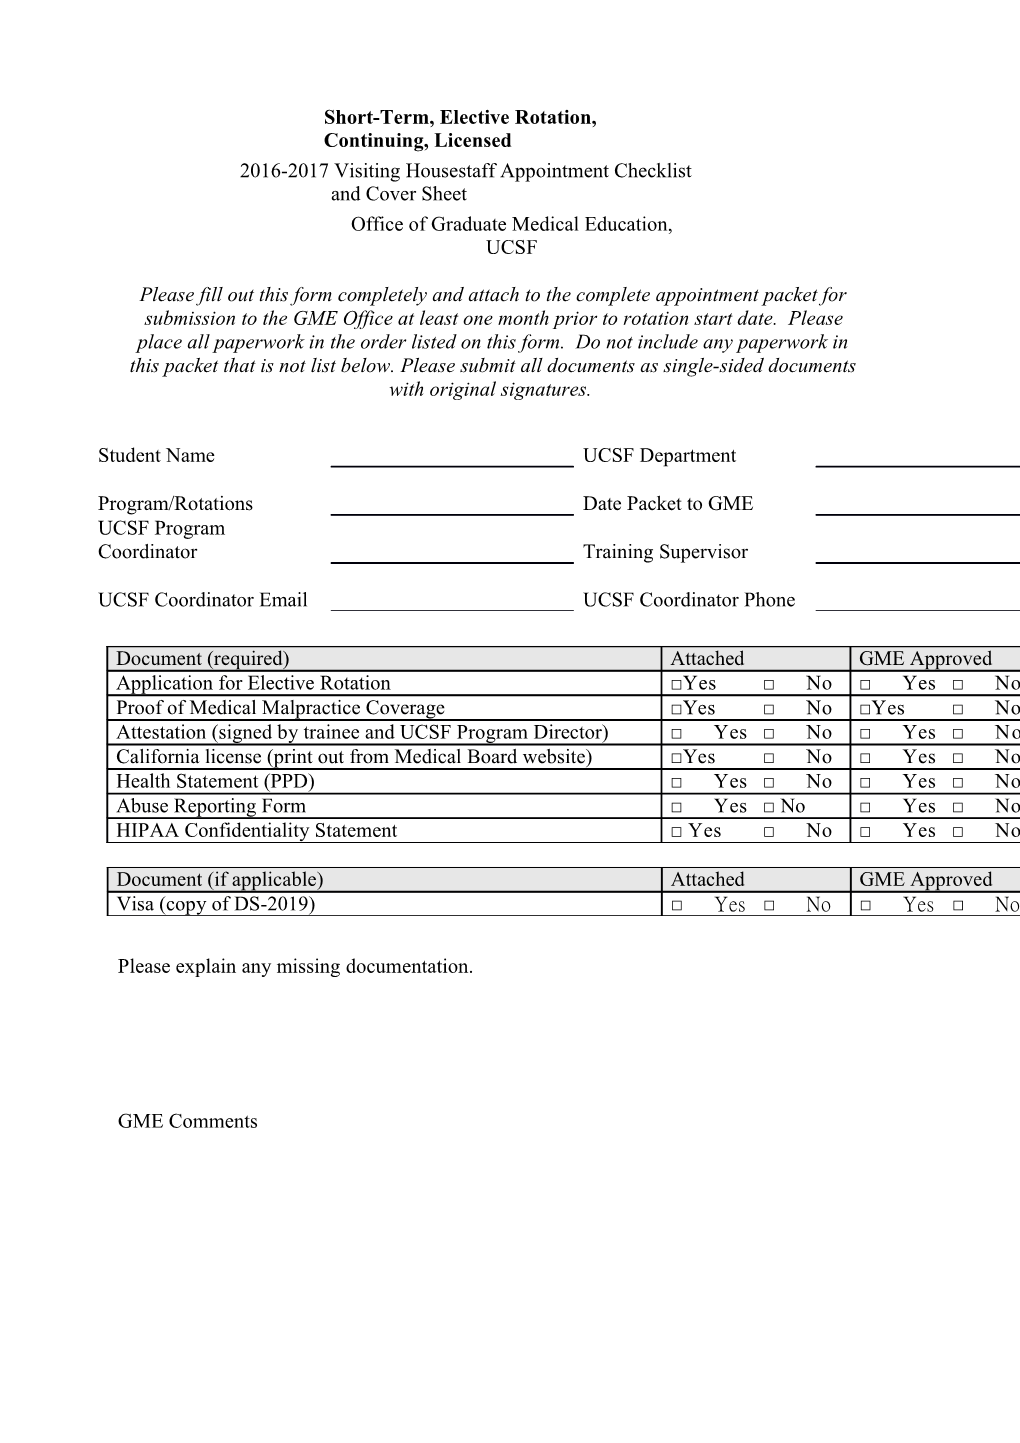 2007 UCSF Housestaff Appointment Checklist and Cover Sheet s2